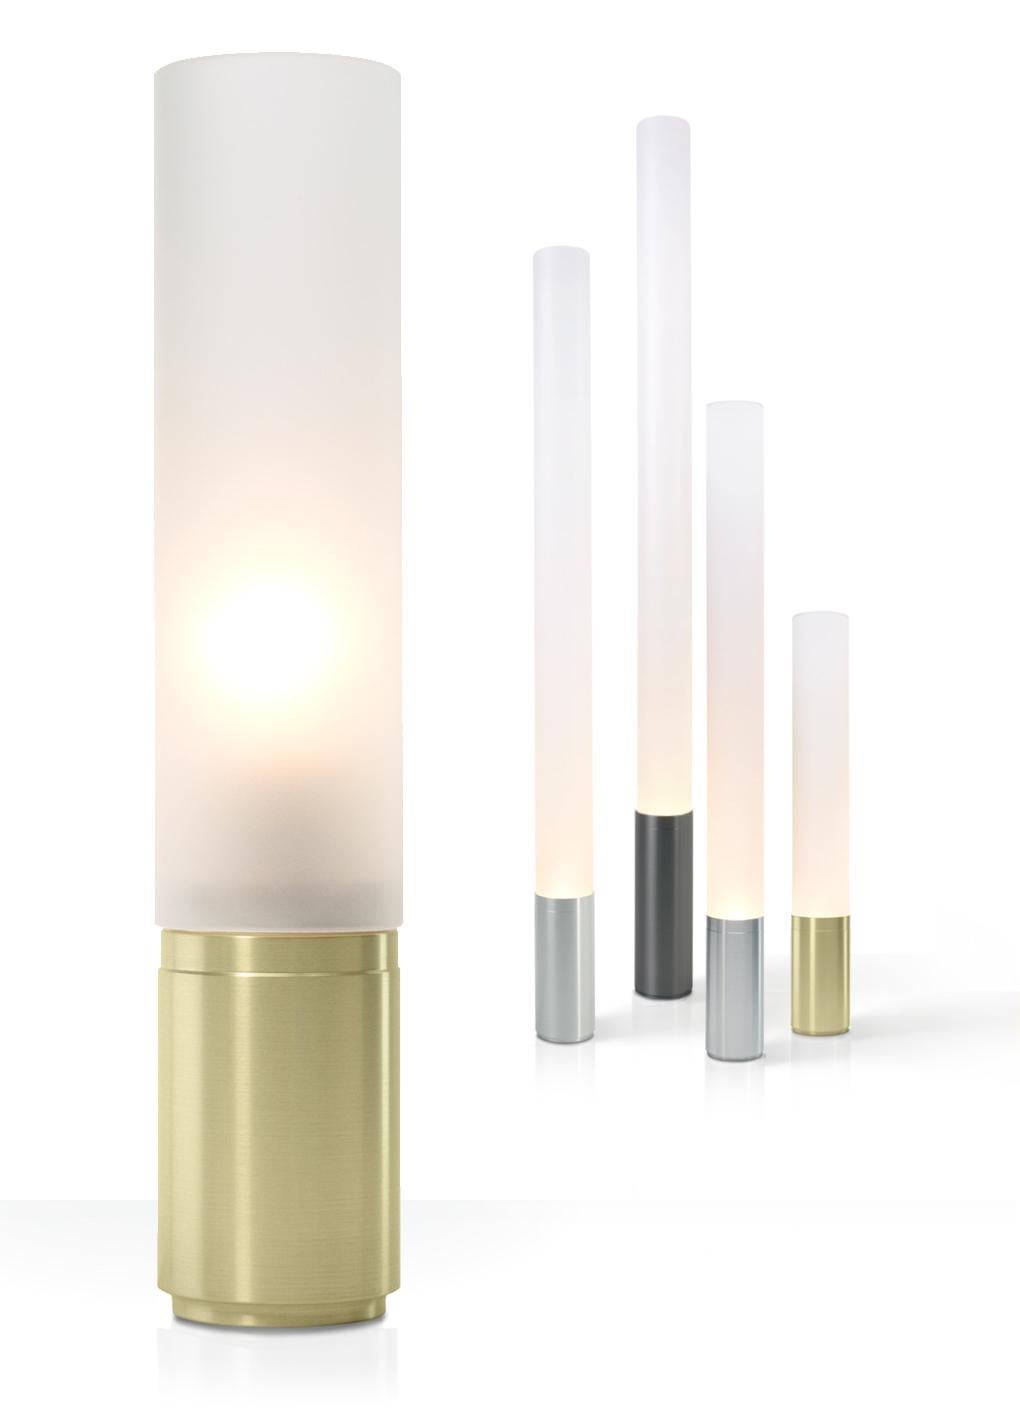 The timeless Elise lamp pays tribute to the advent of the machine age. Its refined machined aluminum base combined with its towering frosted acrylic diffuser serves as the perfect combination for elegant lighting. Elise features full-range dimming